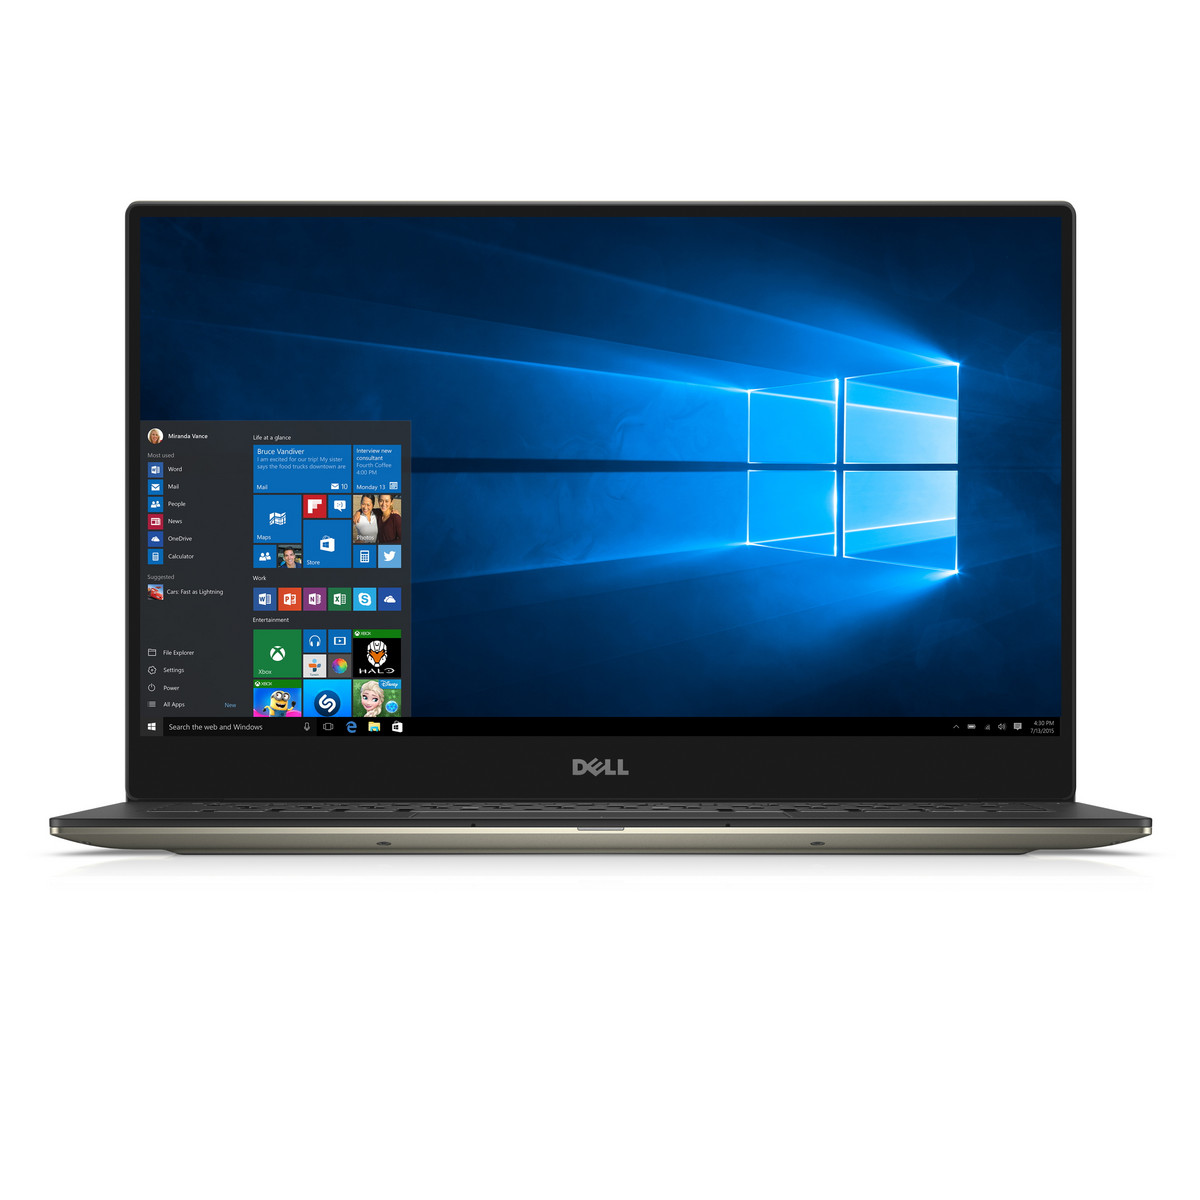 Dell XPS 13 9350 Notebook